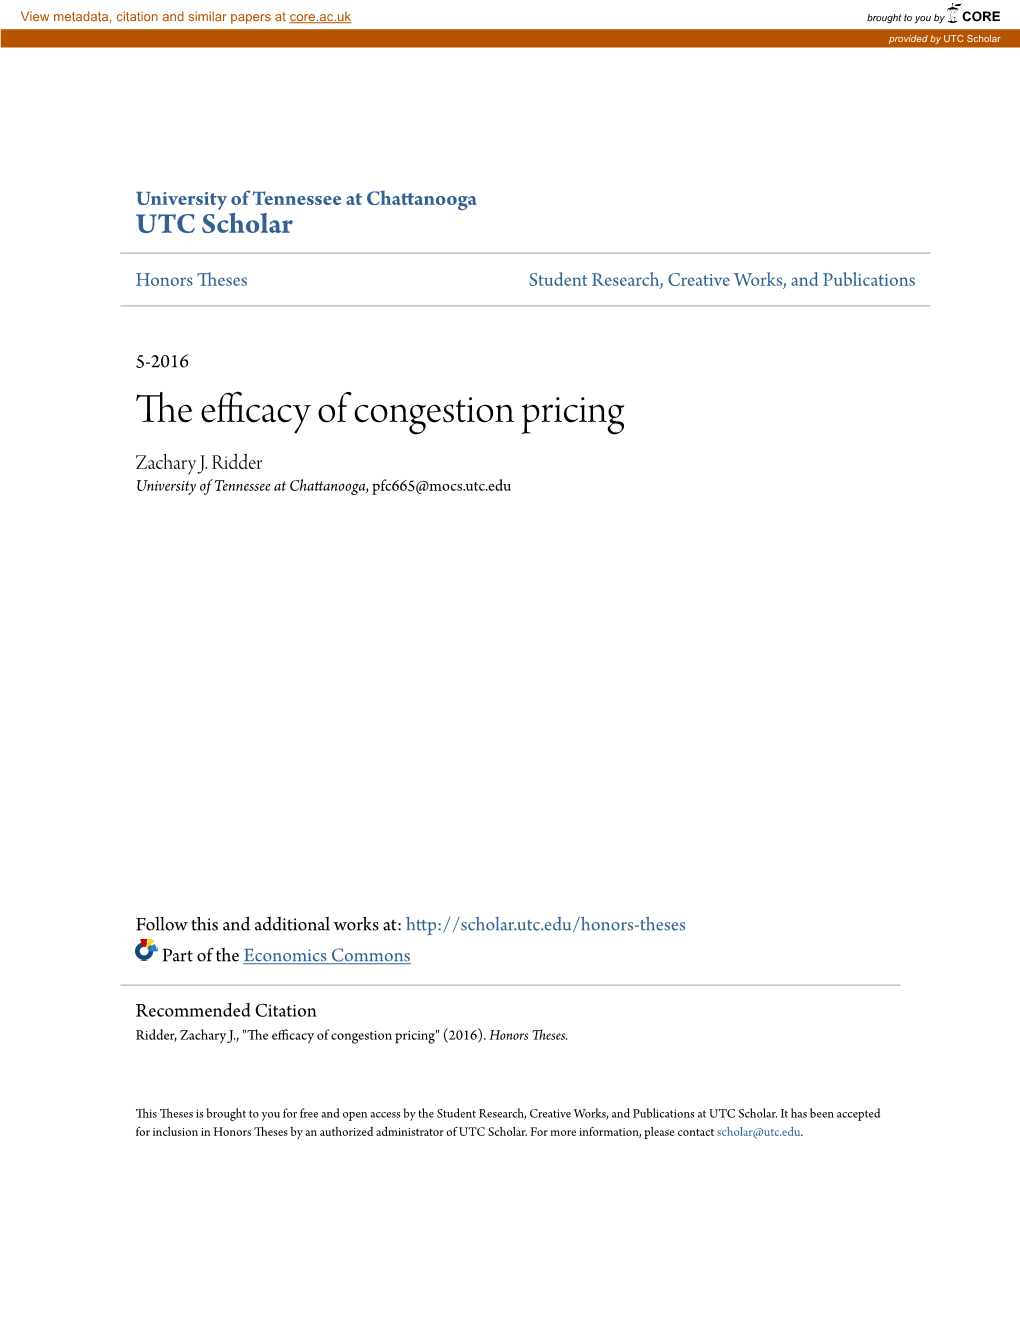 The Efficacy of Congestion Pricing Zachary J